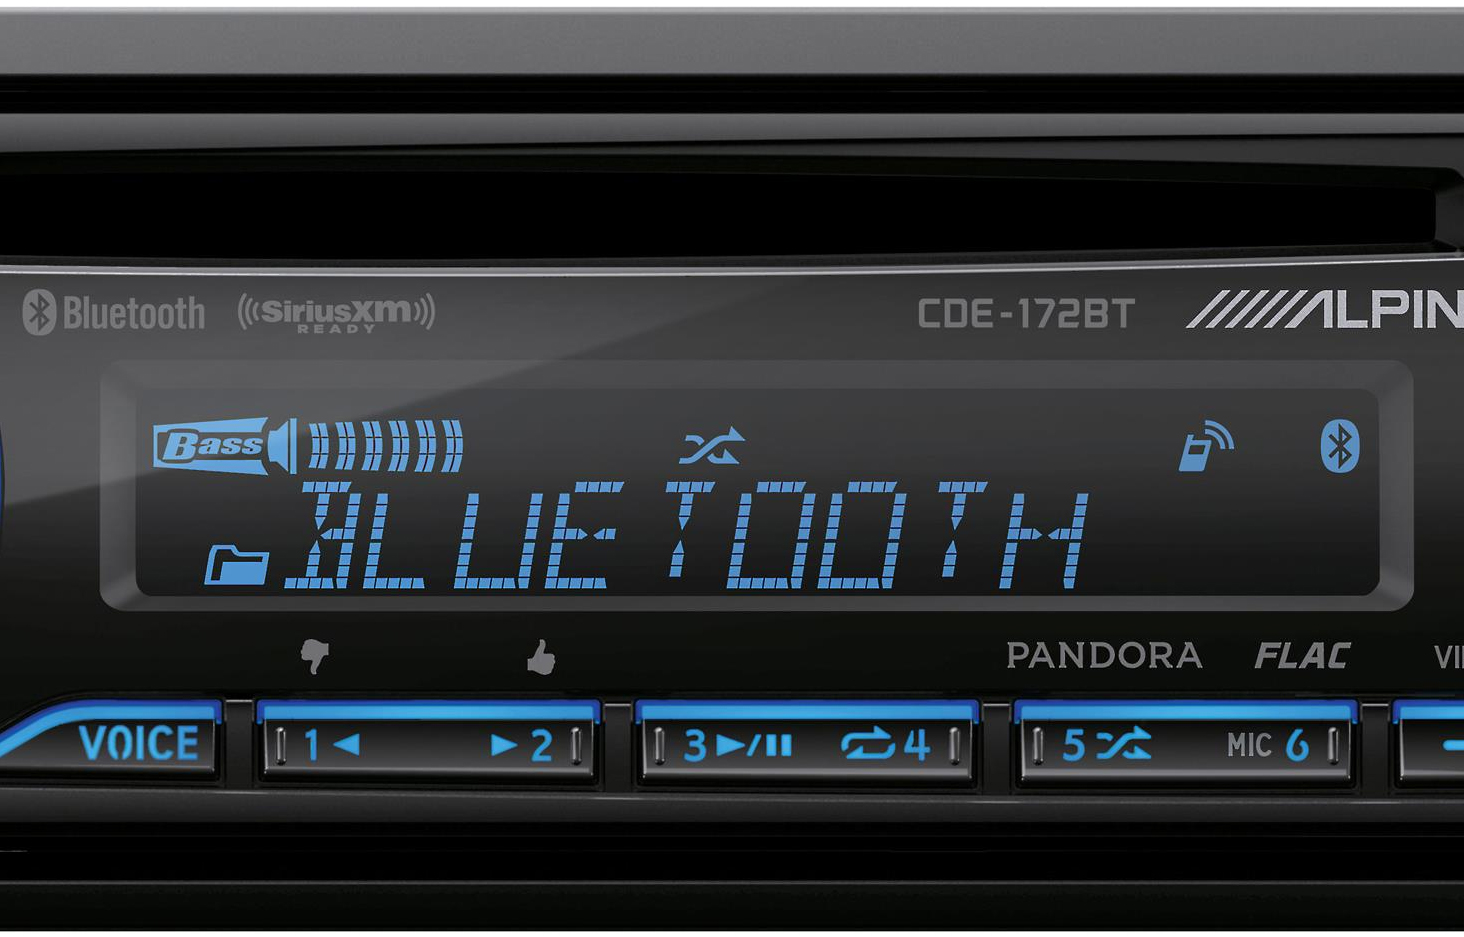 High-Contrast LCD Display And Easy Music Control